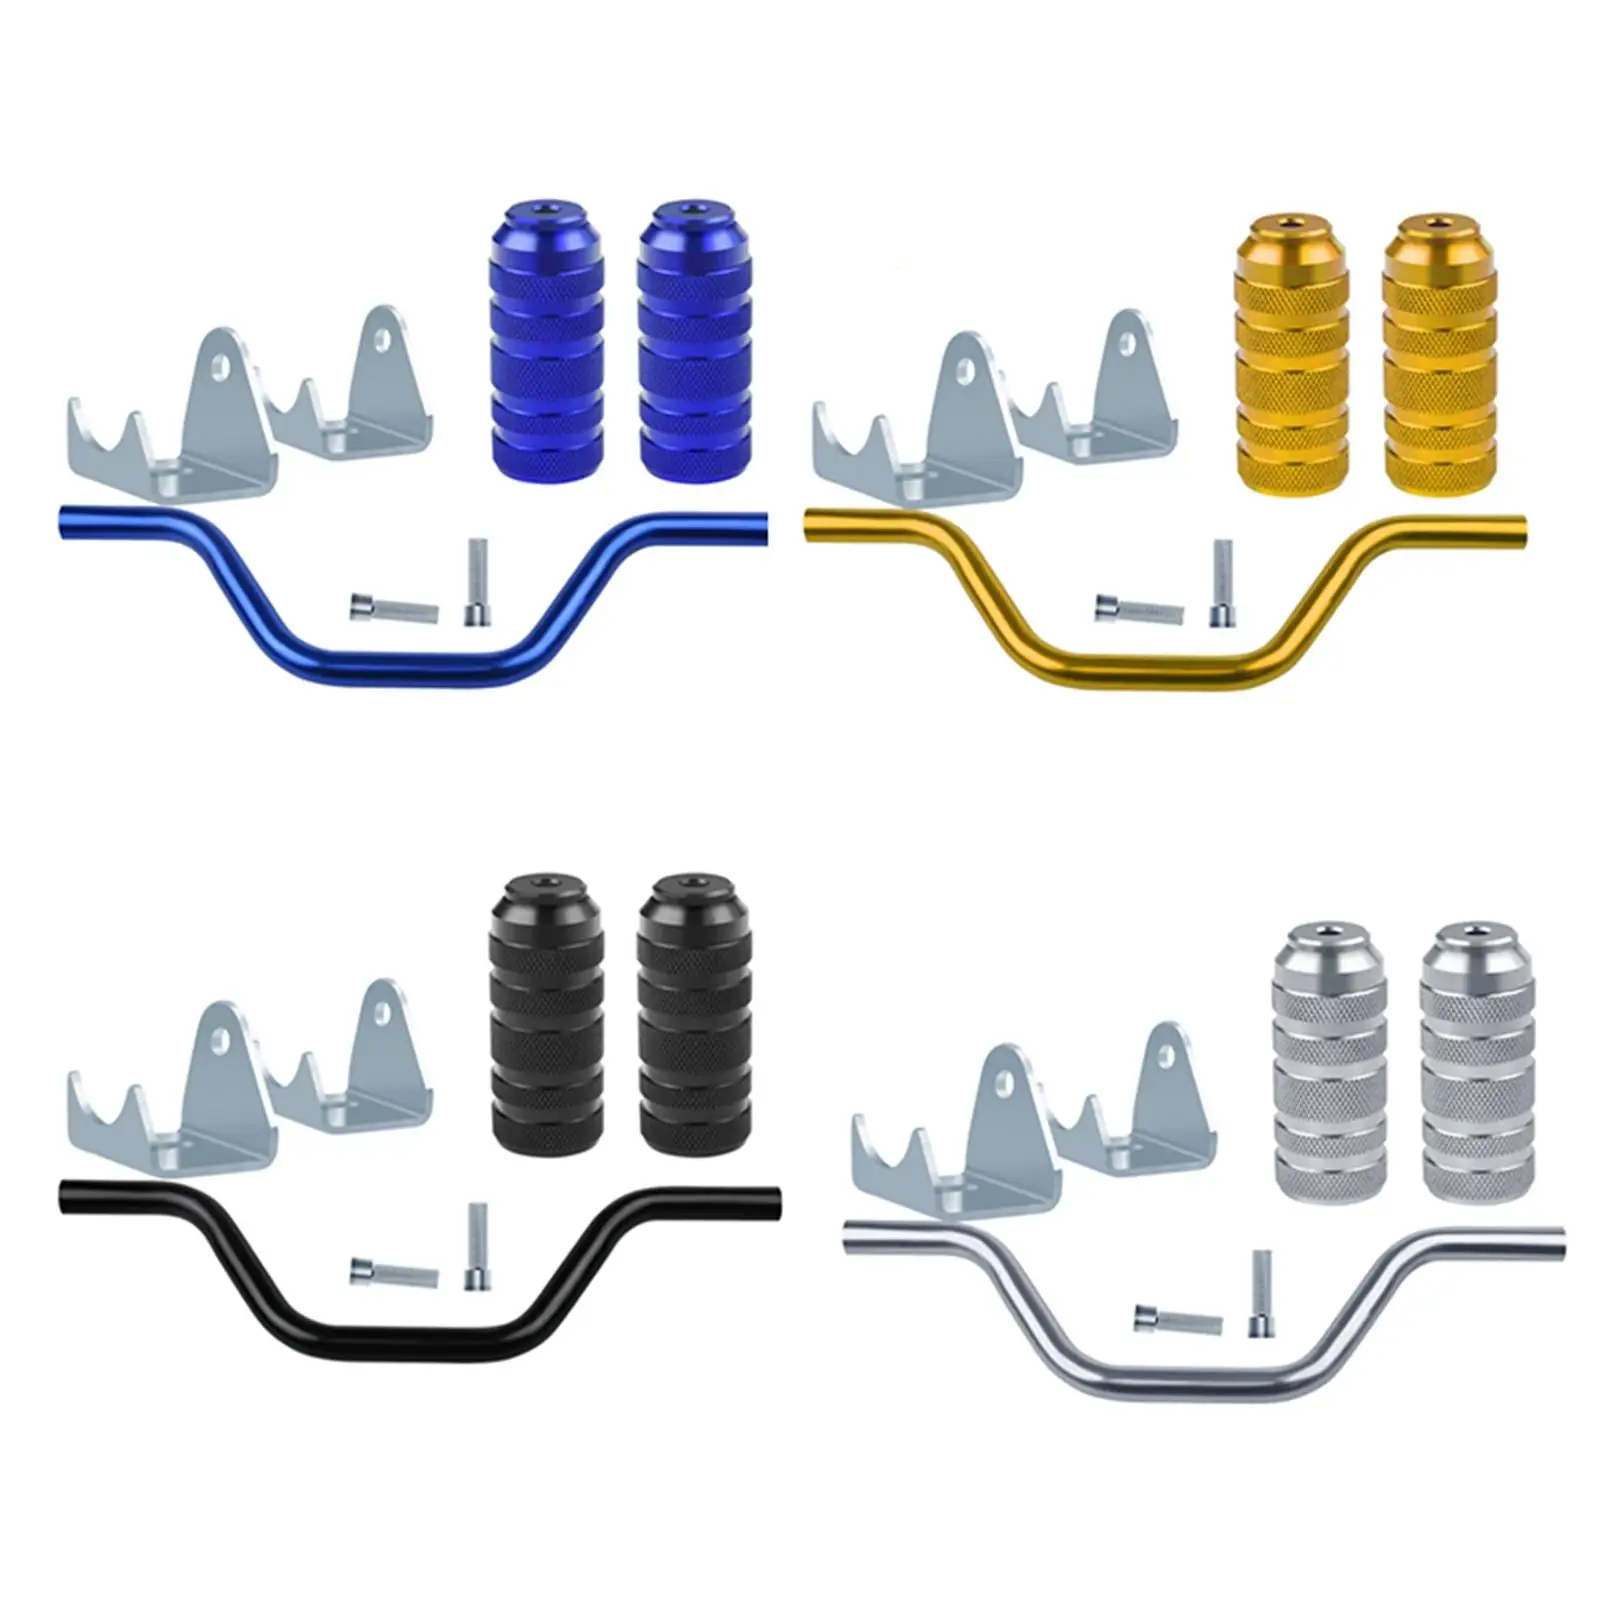 Motorcycle Foot Pegs Pedals Replace Aluminium Alloy CNC Fit for Scooter ATV